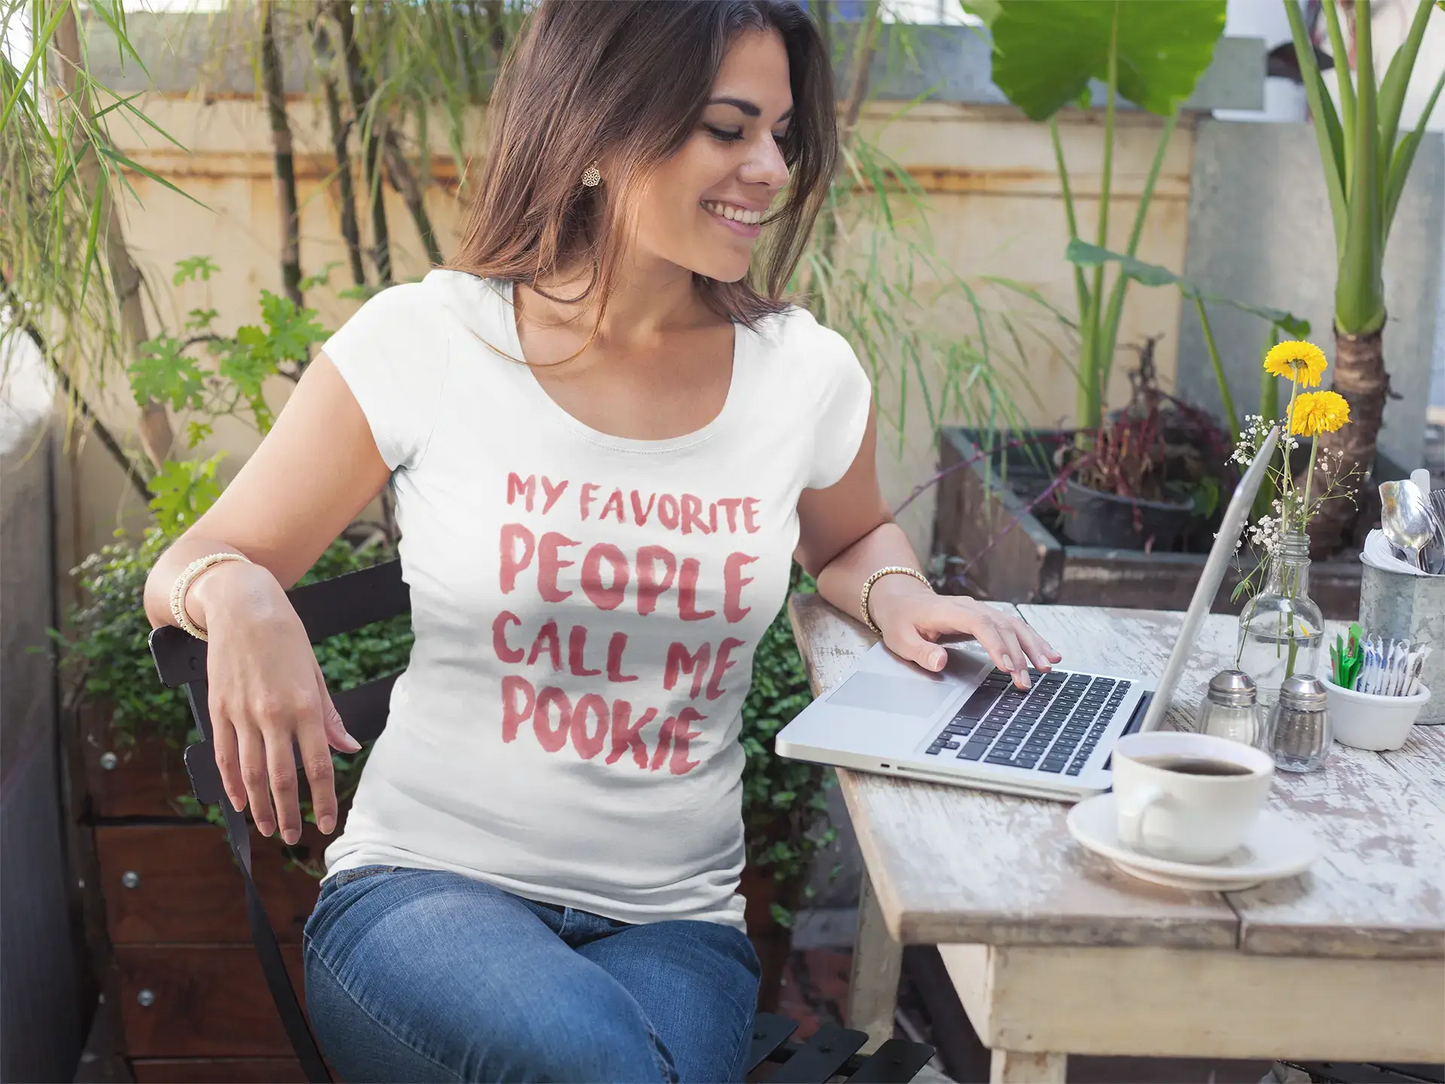 My favorite people call me Pookie , White, Women's Short Sleeve Round Neck T-shirt, gift t-shirt 00364